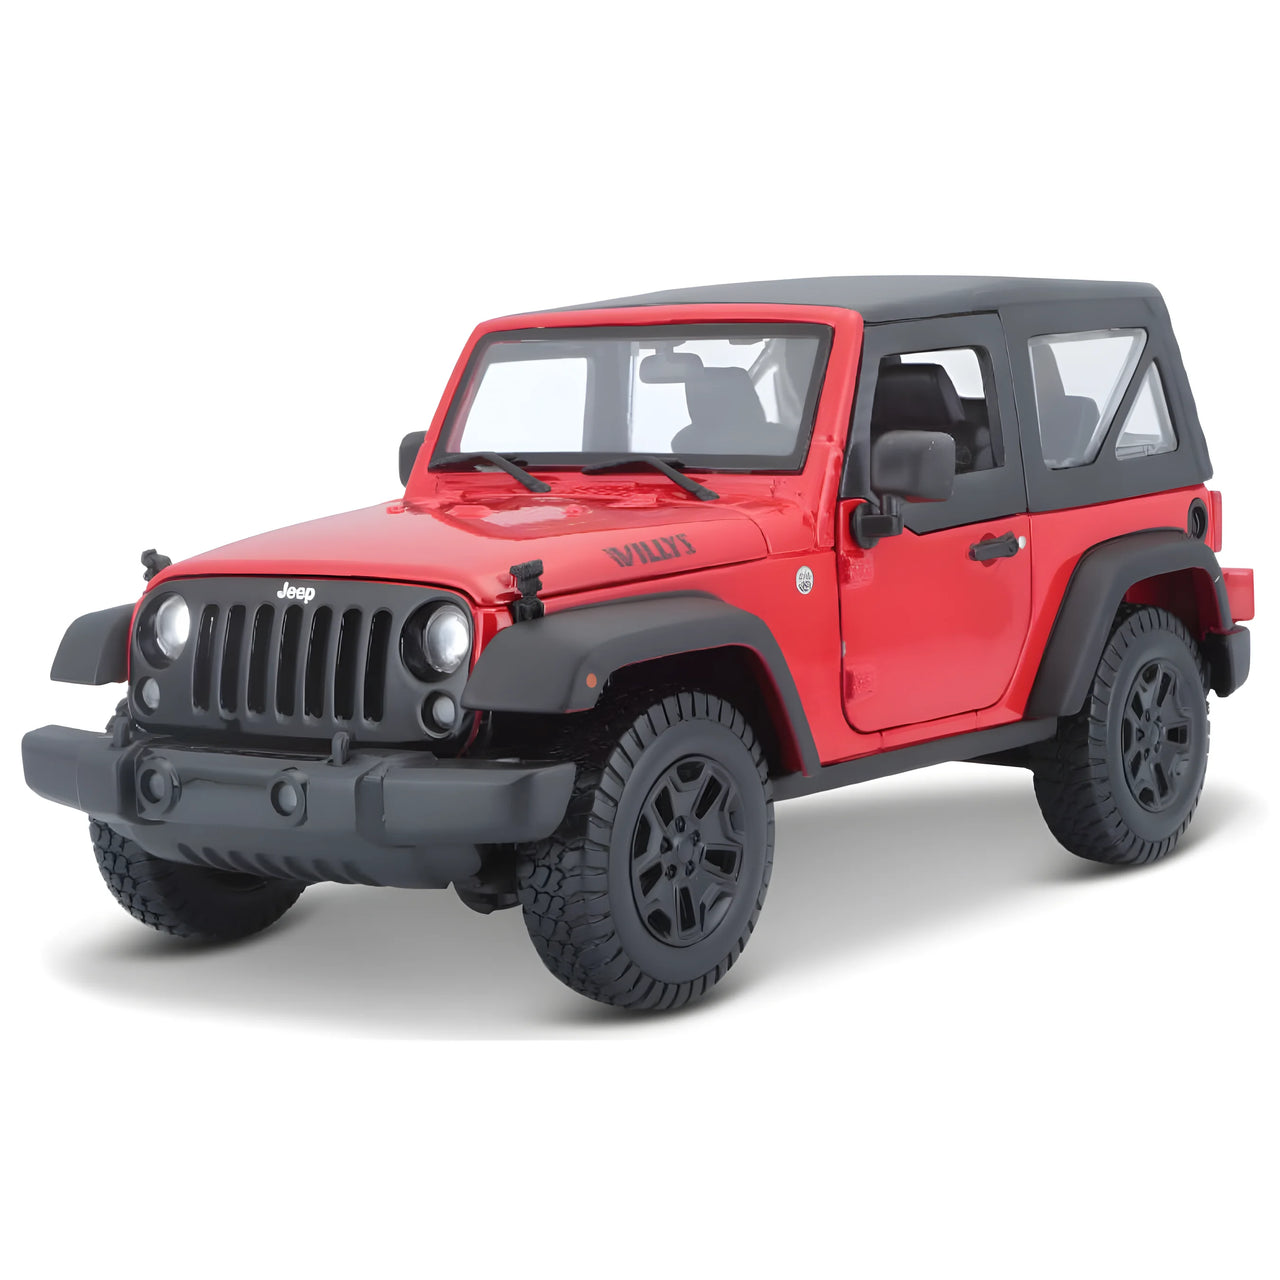 31676R Jeep Wrangler Year 2014 Scale 1:18 (Maisto Special Edition)